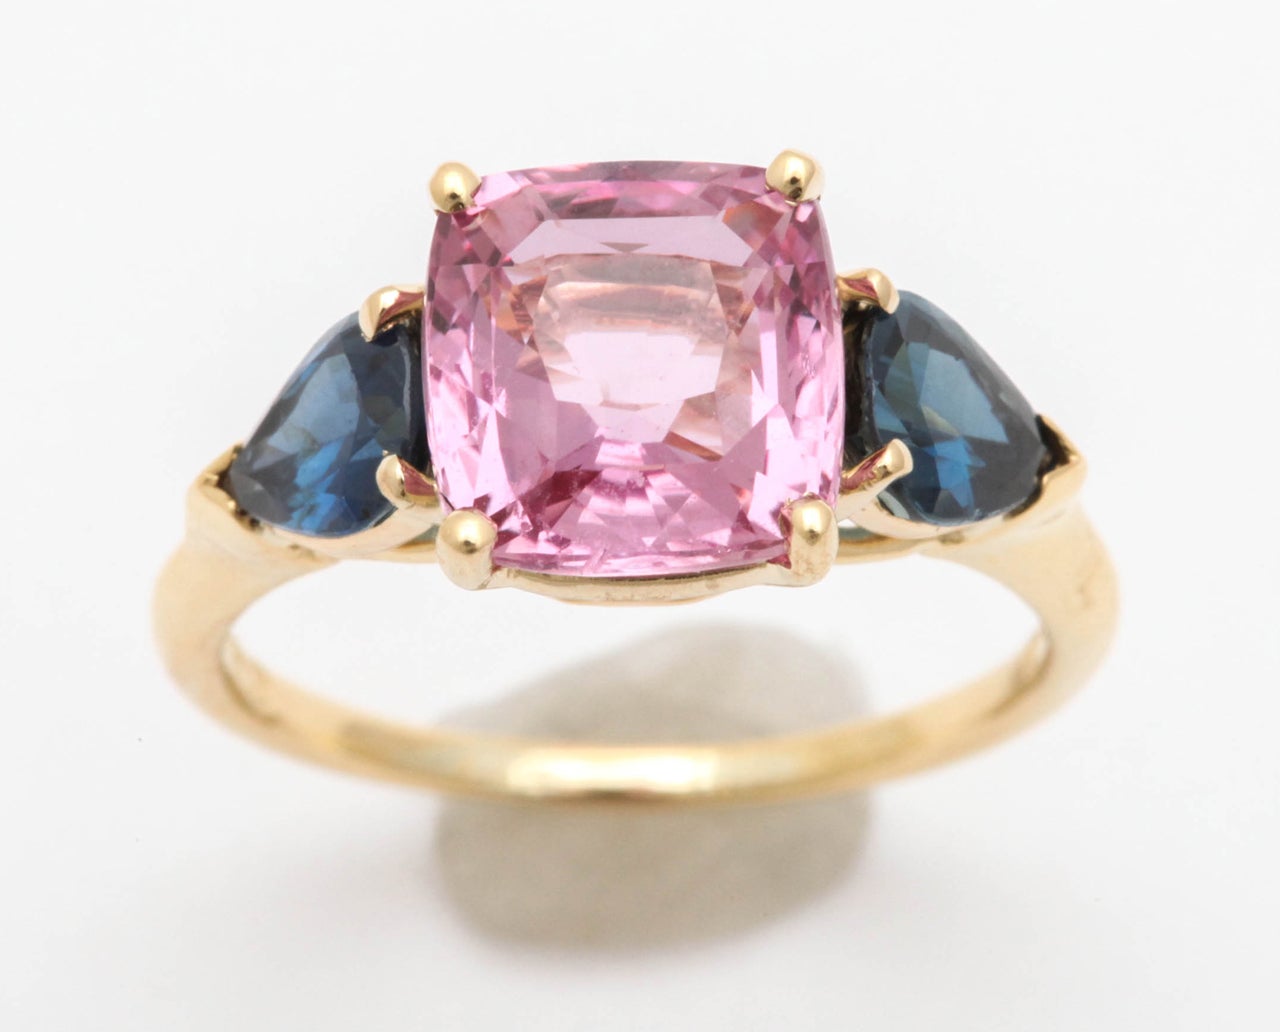 18k Yellow Gold Mount centering a Cushion shape Pink sapphire 3.60 carats
Flanked by 2 pear shape blue Sapphires 1.32 carats